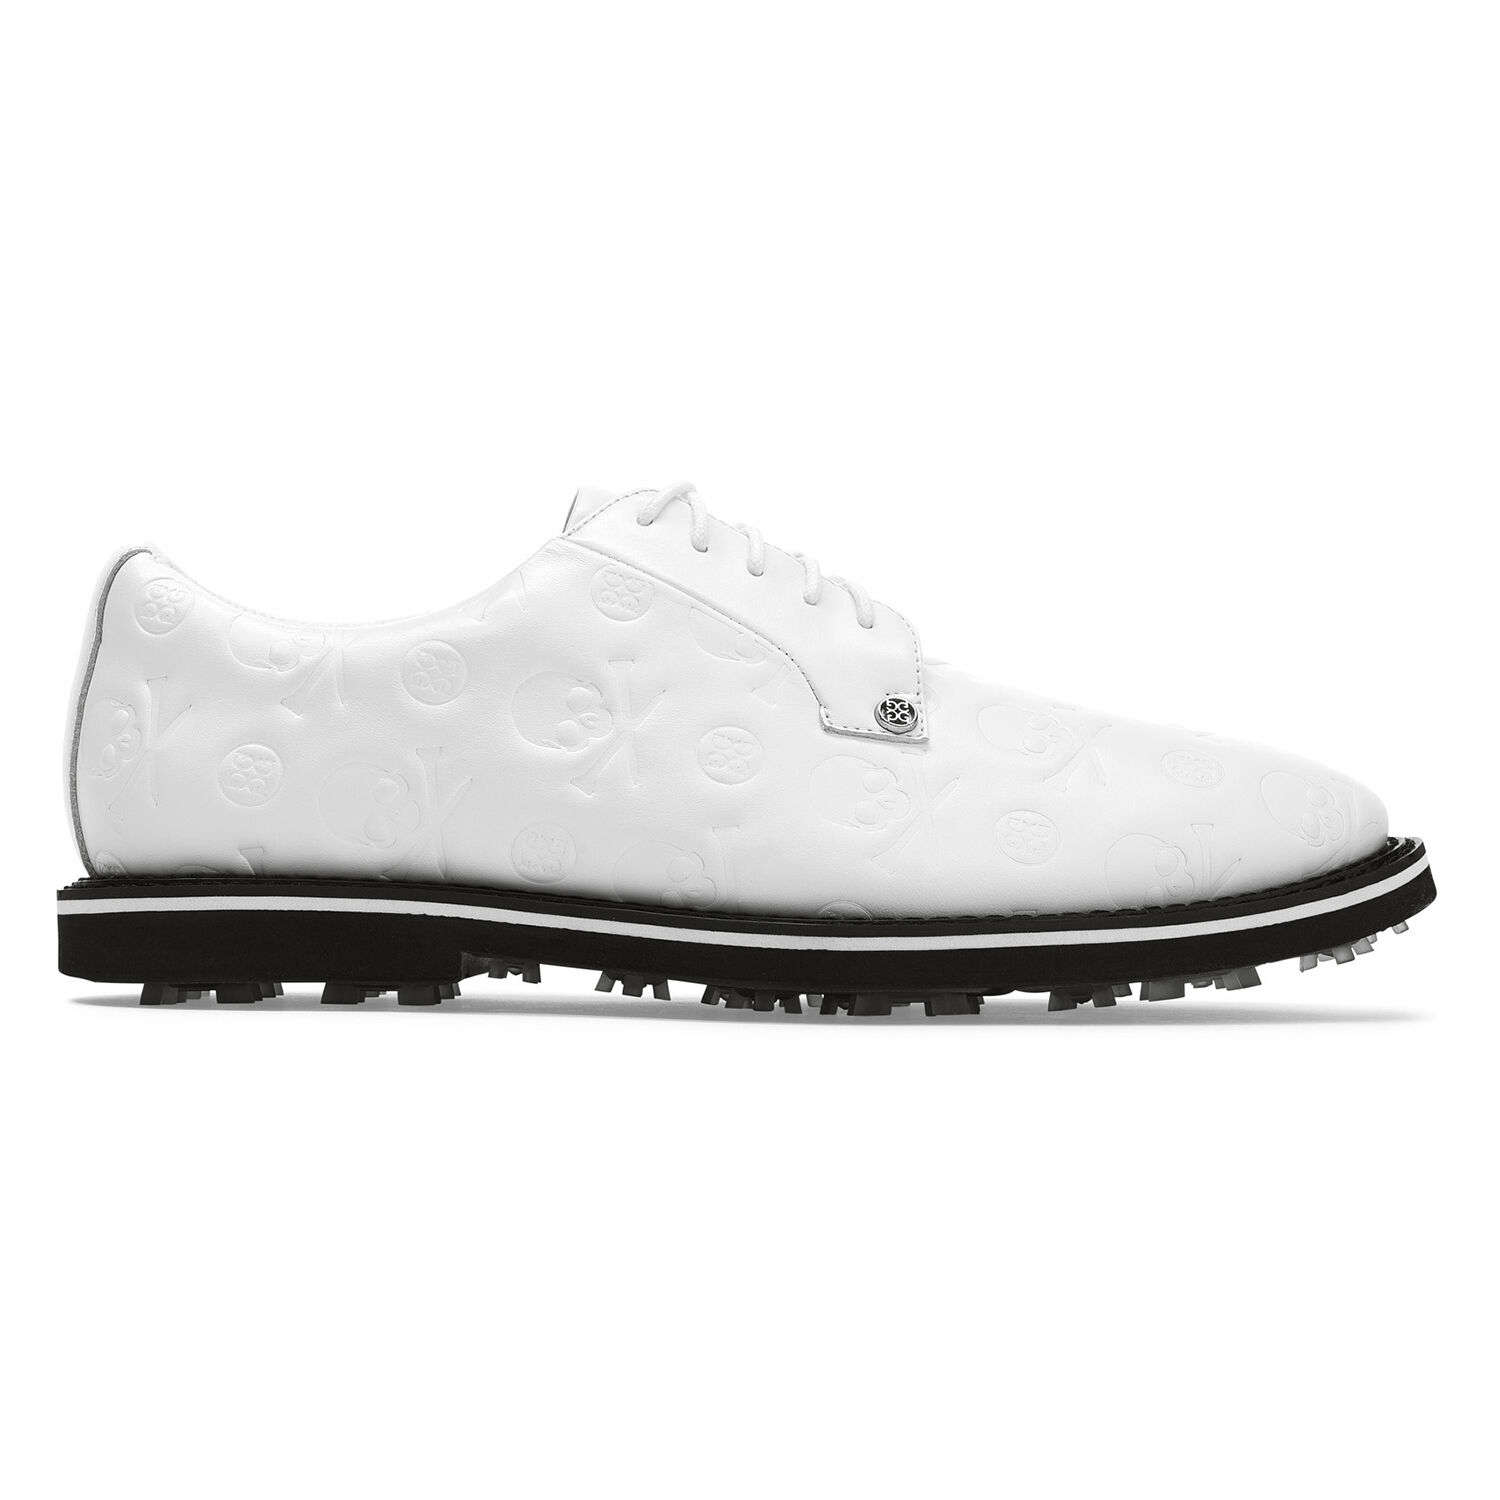 g force golf shoes